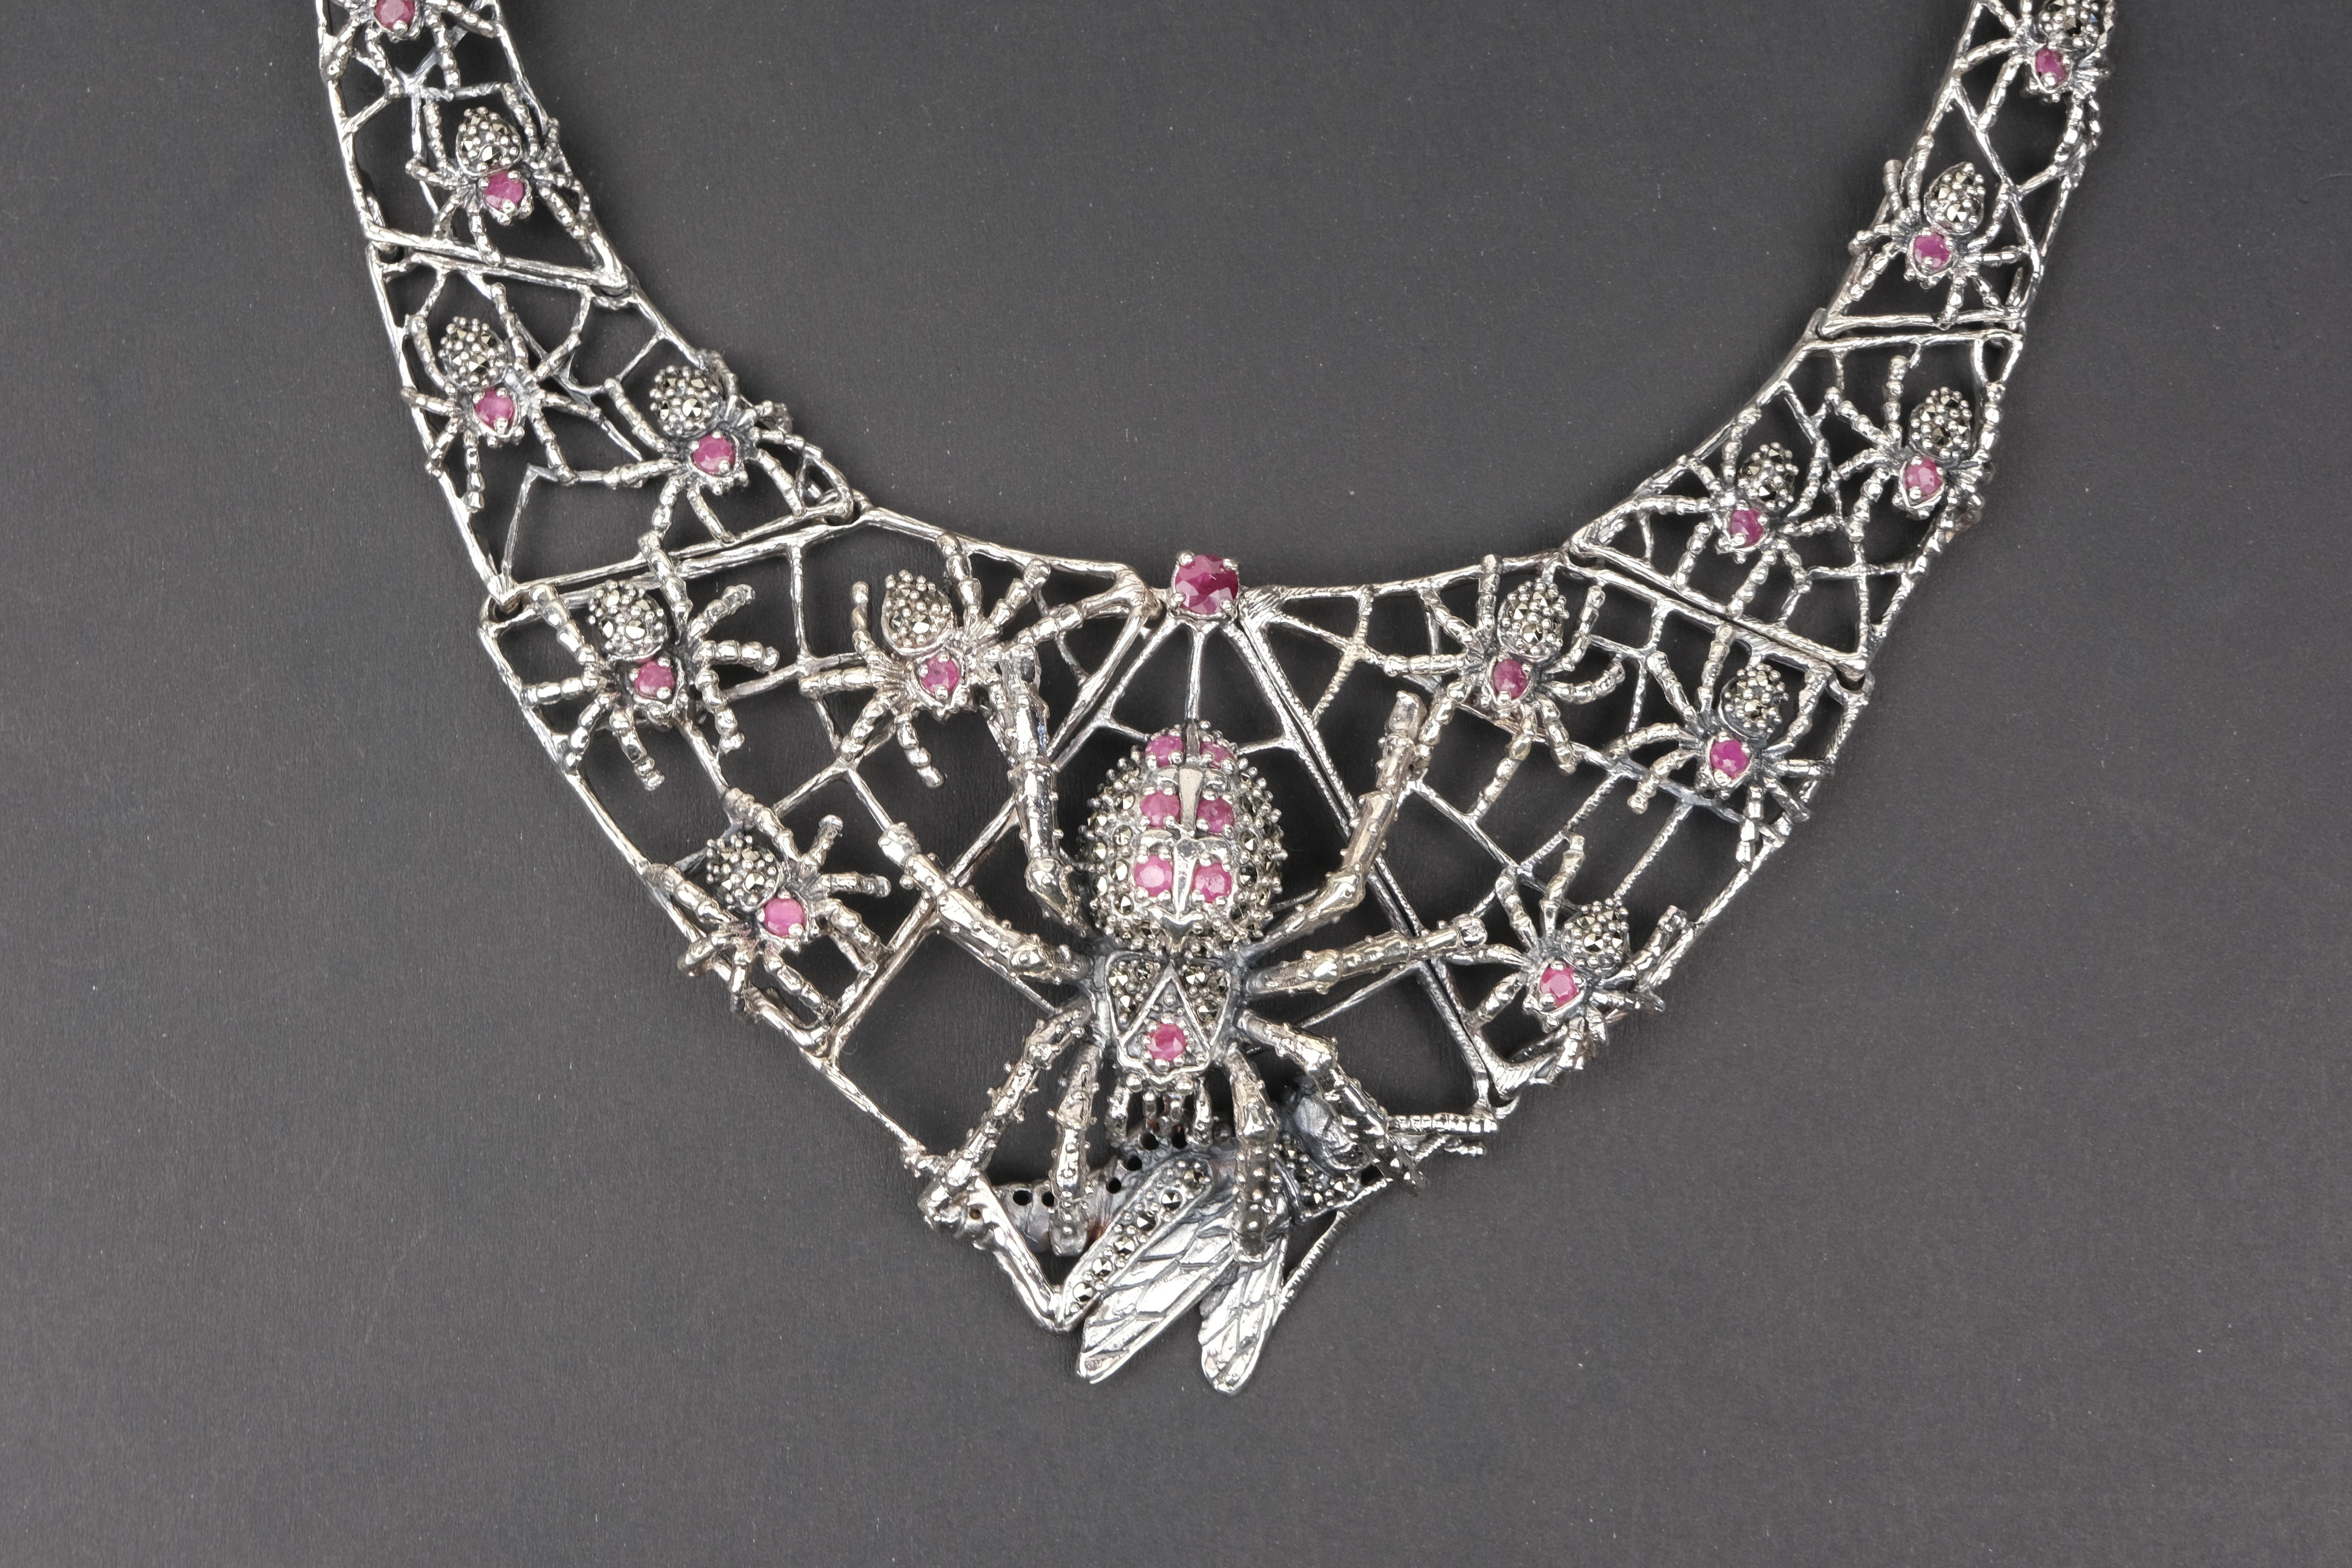 Sterling Silver Ruby and Marcasite Spider and Web Bib Necklace

I have never really understood arachnophobia, people’s fear of spiders. I know that walking face first into a spider’s web in a dark basement can be a little disconcerting but I think